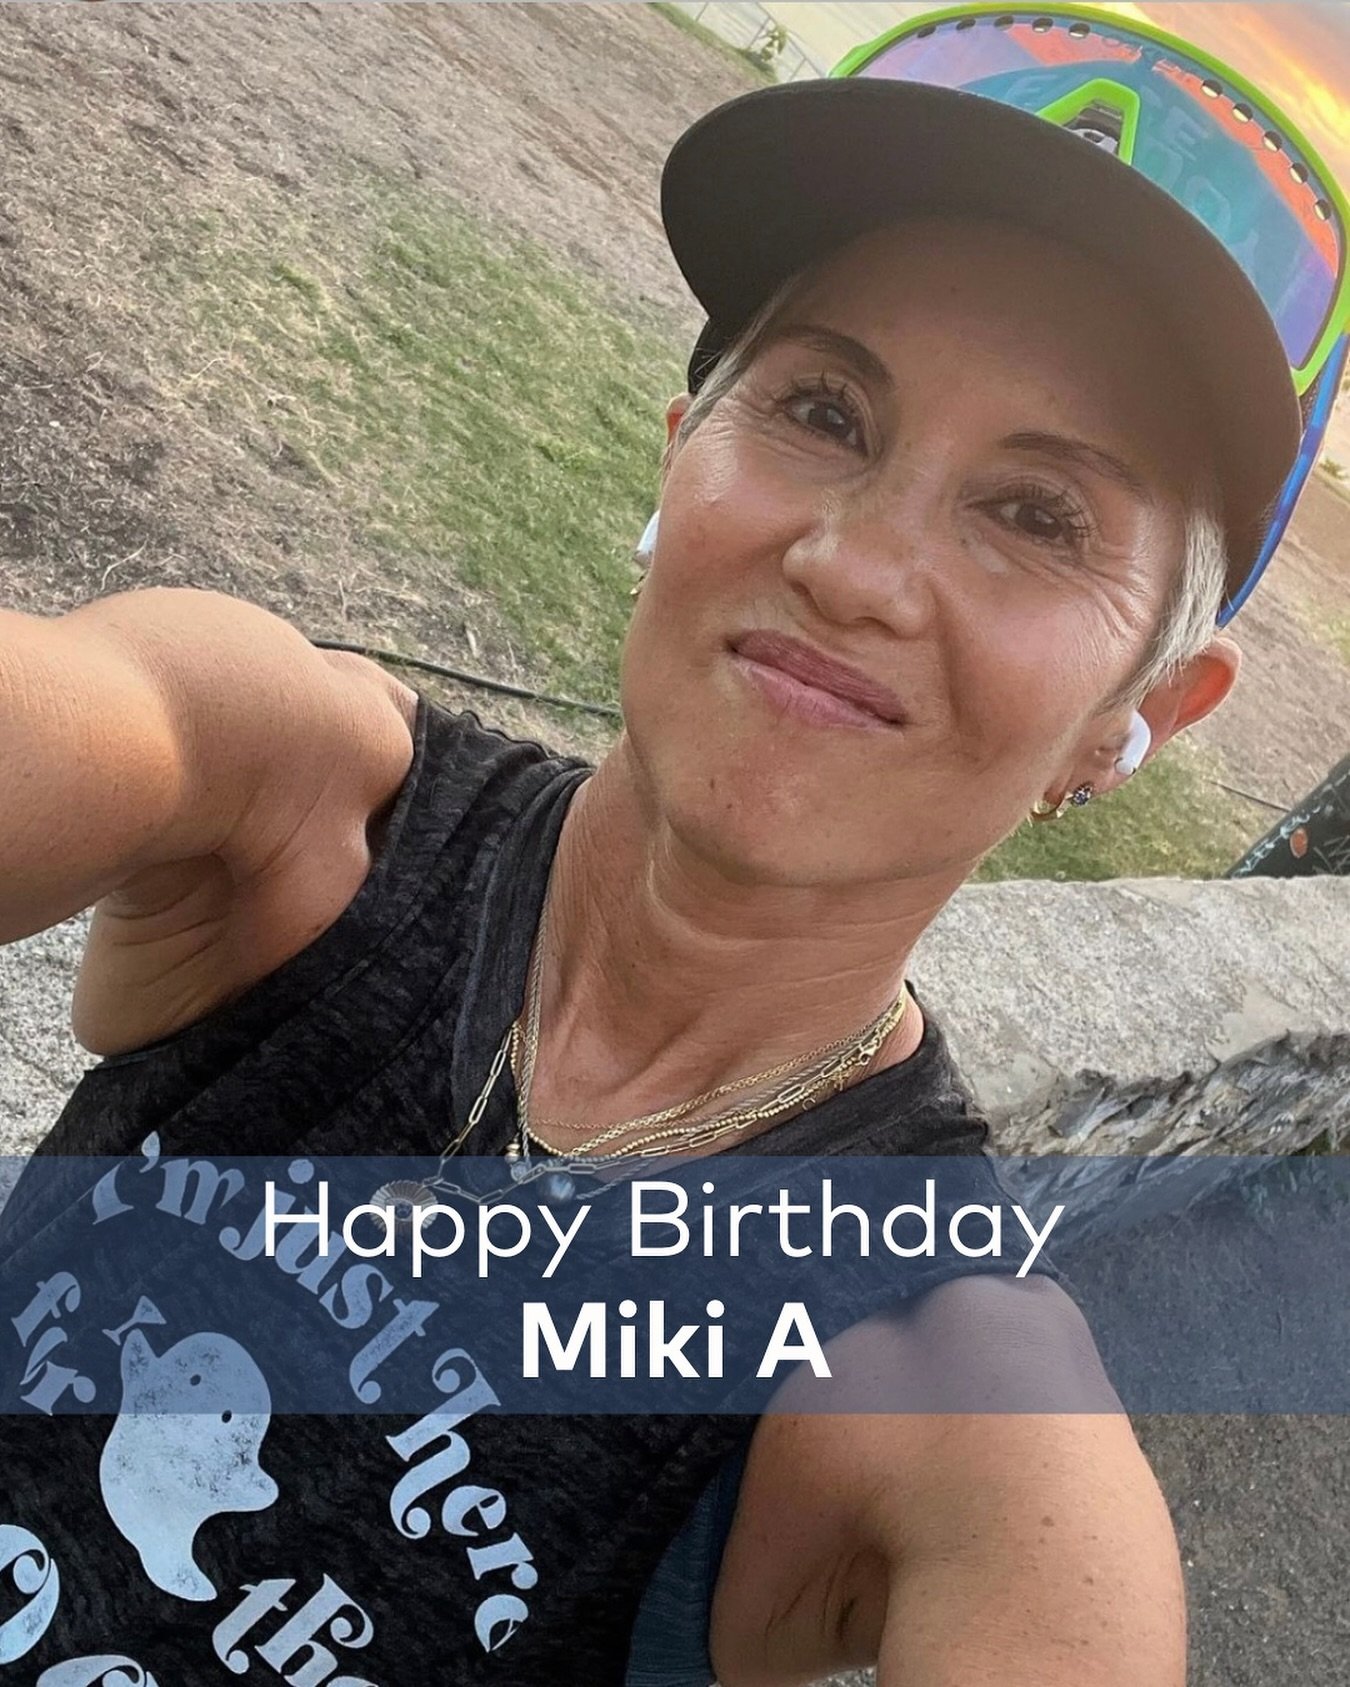 Happy birthday @anzaimiki !!!

Miki is a one in 8 billion kind of person. So generous, compassionate, funny, and effervescent. If you&rsquo;re lucky enough to be hanging around Miki, you probably have a giant smile on your face. 

Three fun facts abo